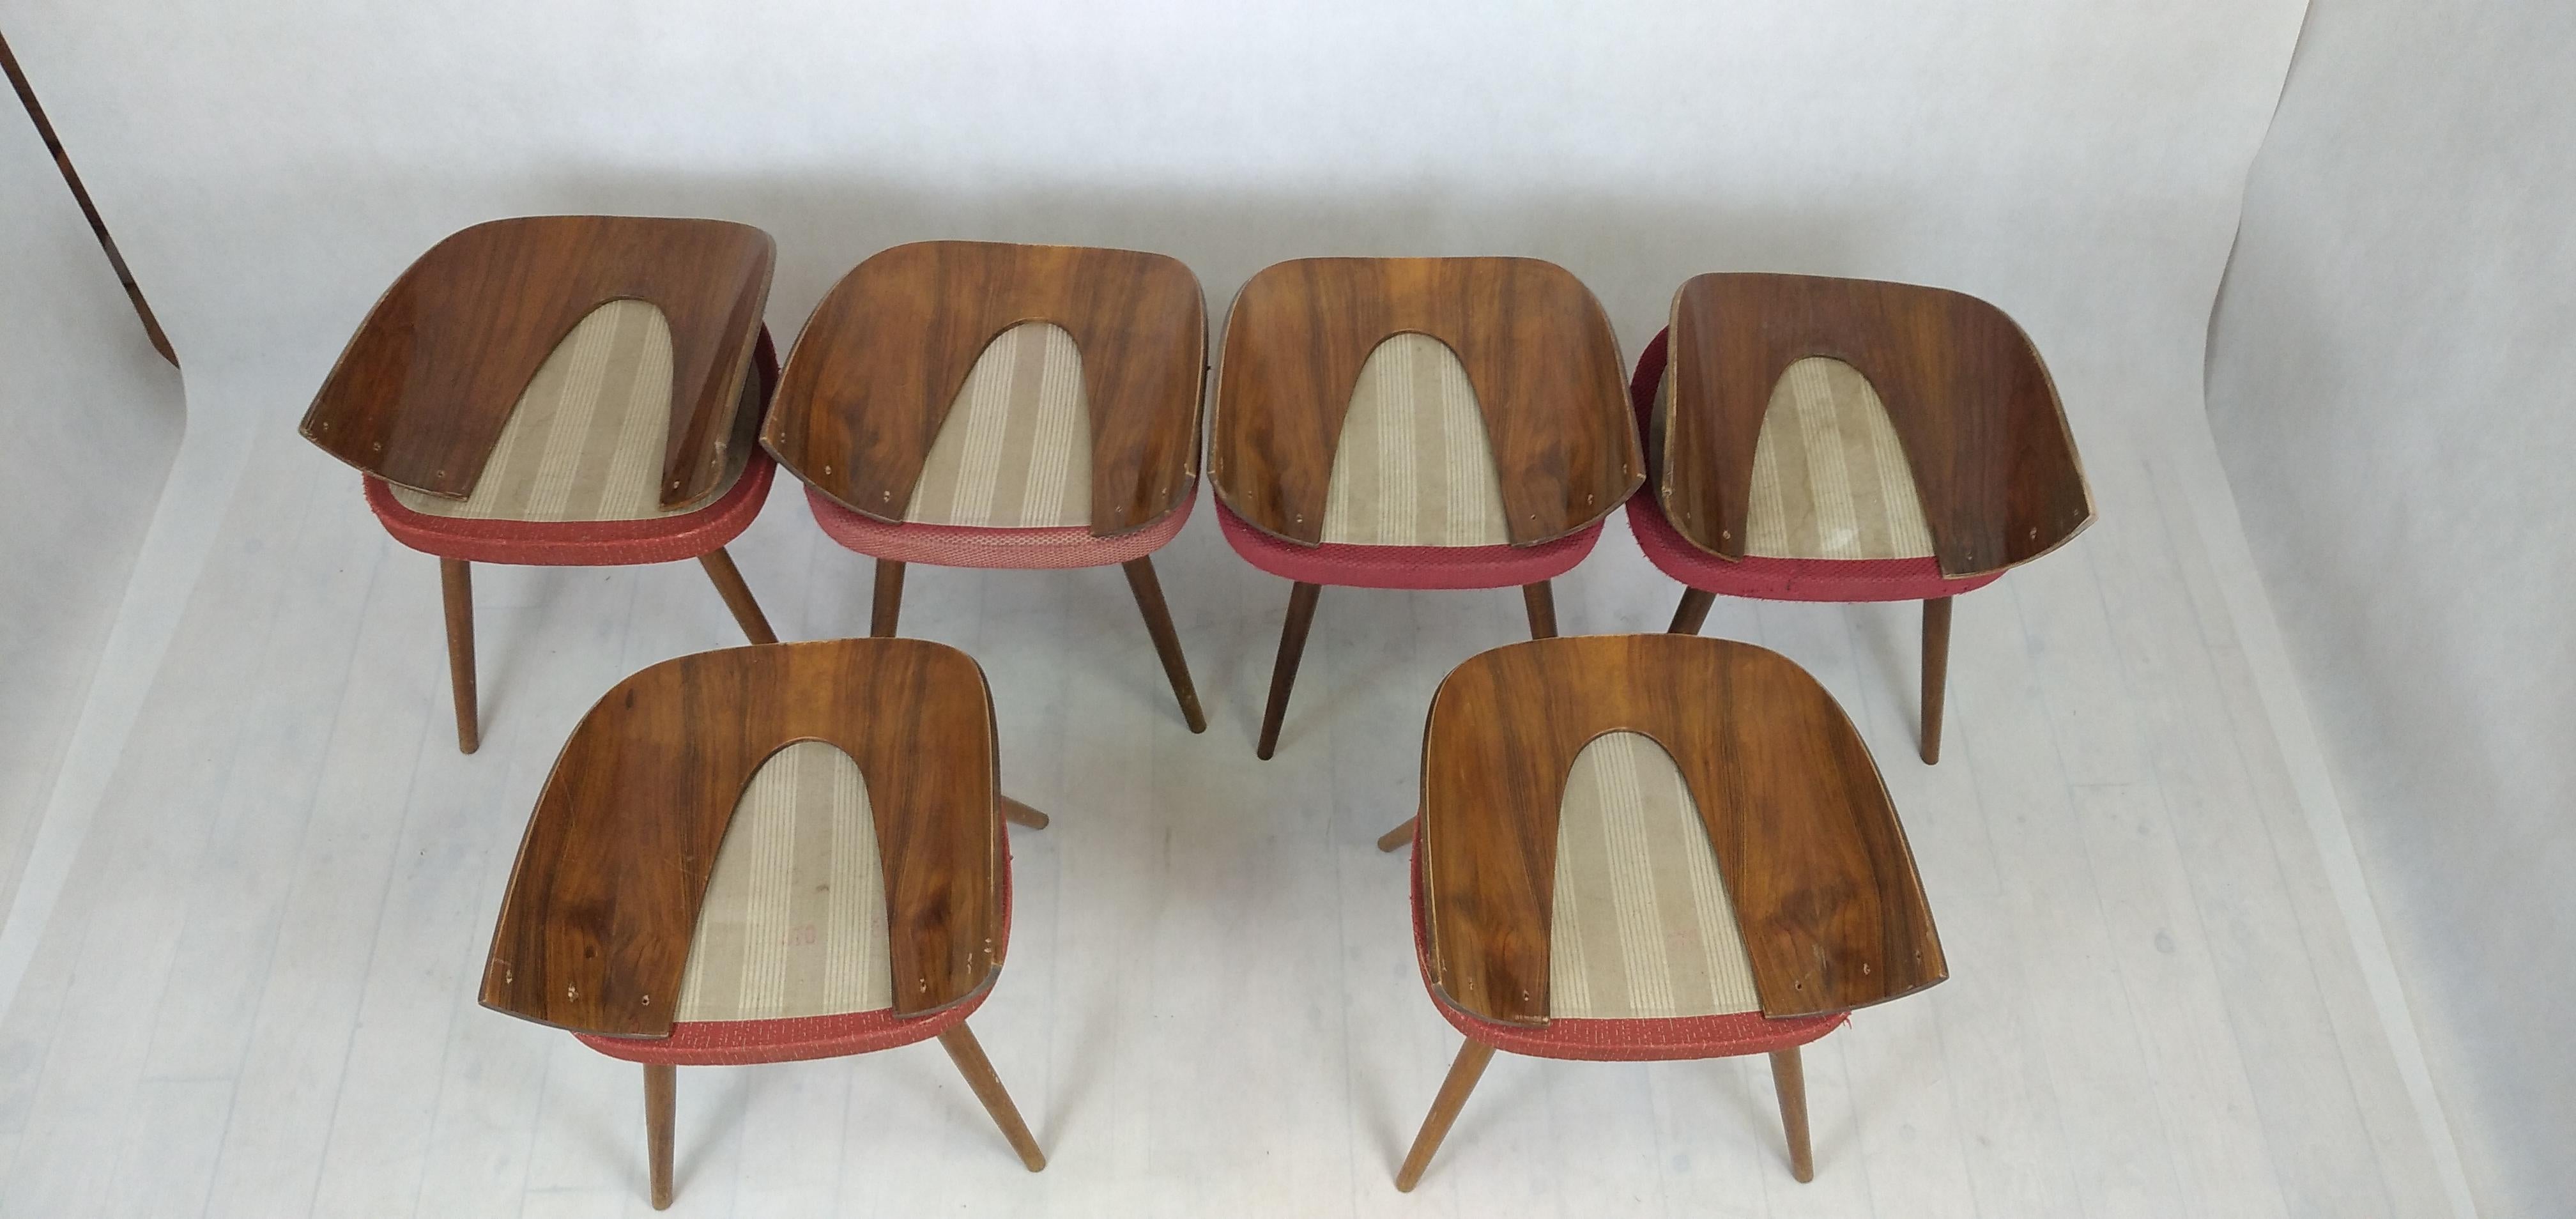 Set of 6 chairs designed by Antonin Suman and produced in Czechoslovakia in 1960's. Chairs made of beech wood, backs made of bent plywood with walnut veneer. Chairs in original condition, to be restored, visible scratches in varnish, worn